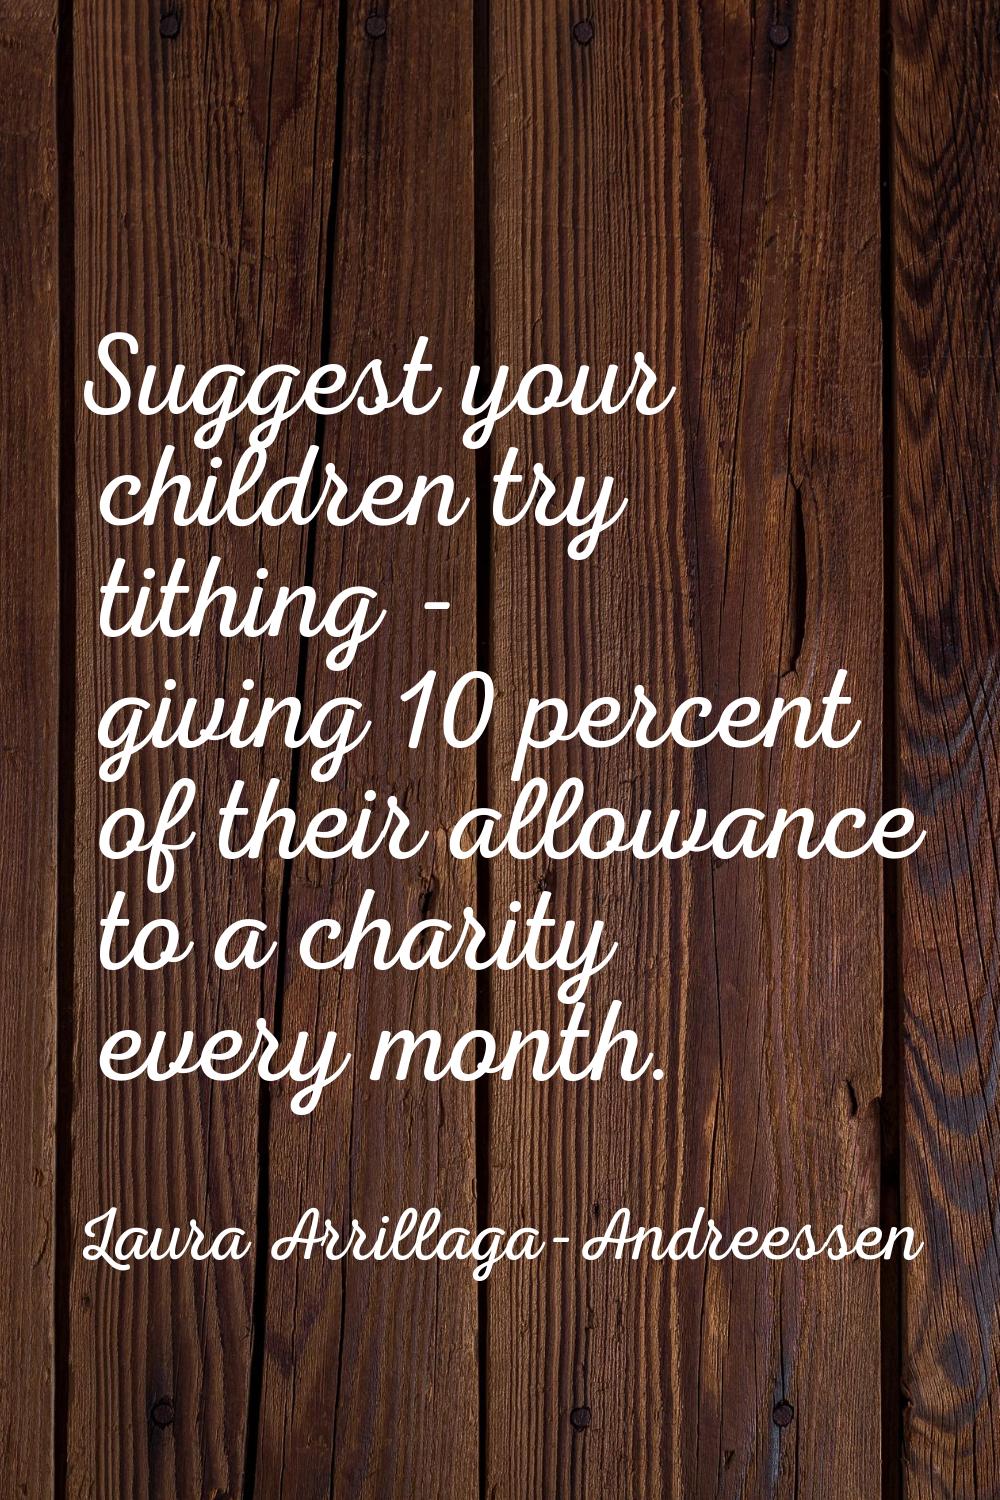 Suggest your children try tithing - giving 10 percent of their allowance to a charity every month.